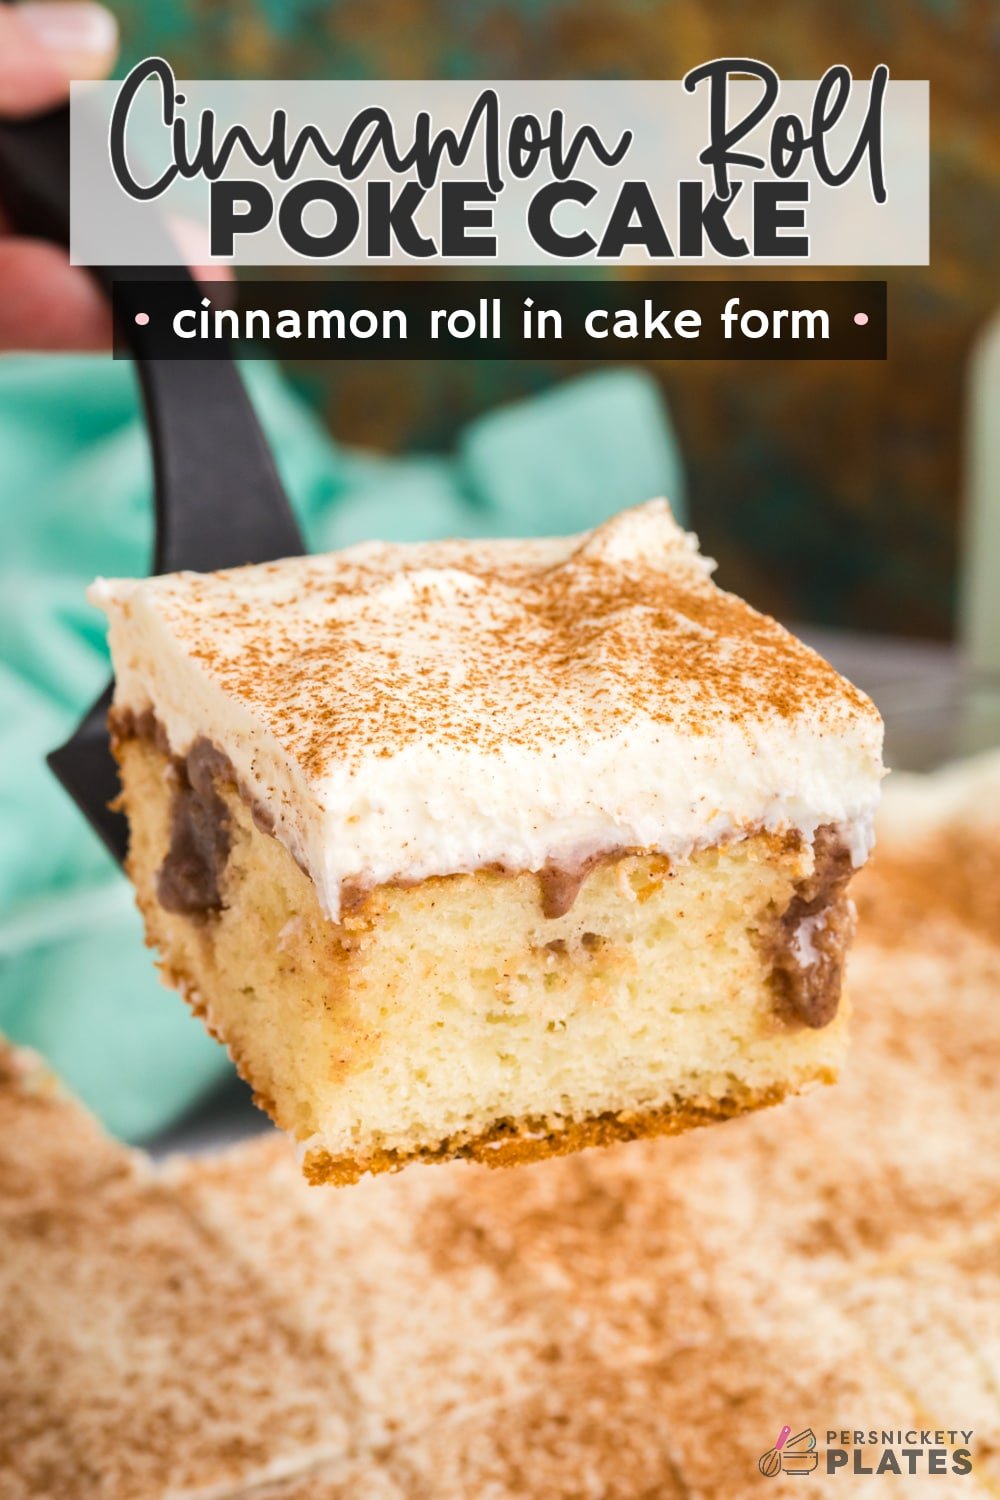 This easy cinnamon roll poke cake is made with a fluffy vanilla cake which gets poked and filled with rich and creamy cinnamon and brown sugar filling, then topped with a homemade cream cheese frosting. This ultra-rich cinnamon poke cake is the perfect way to recreate cinnamon roll flavors in the form of an easy sheet cake! | www.persnicketyplates.com